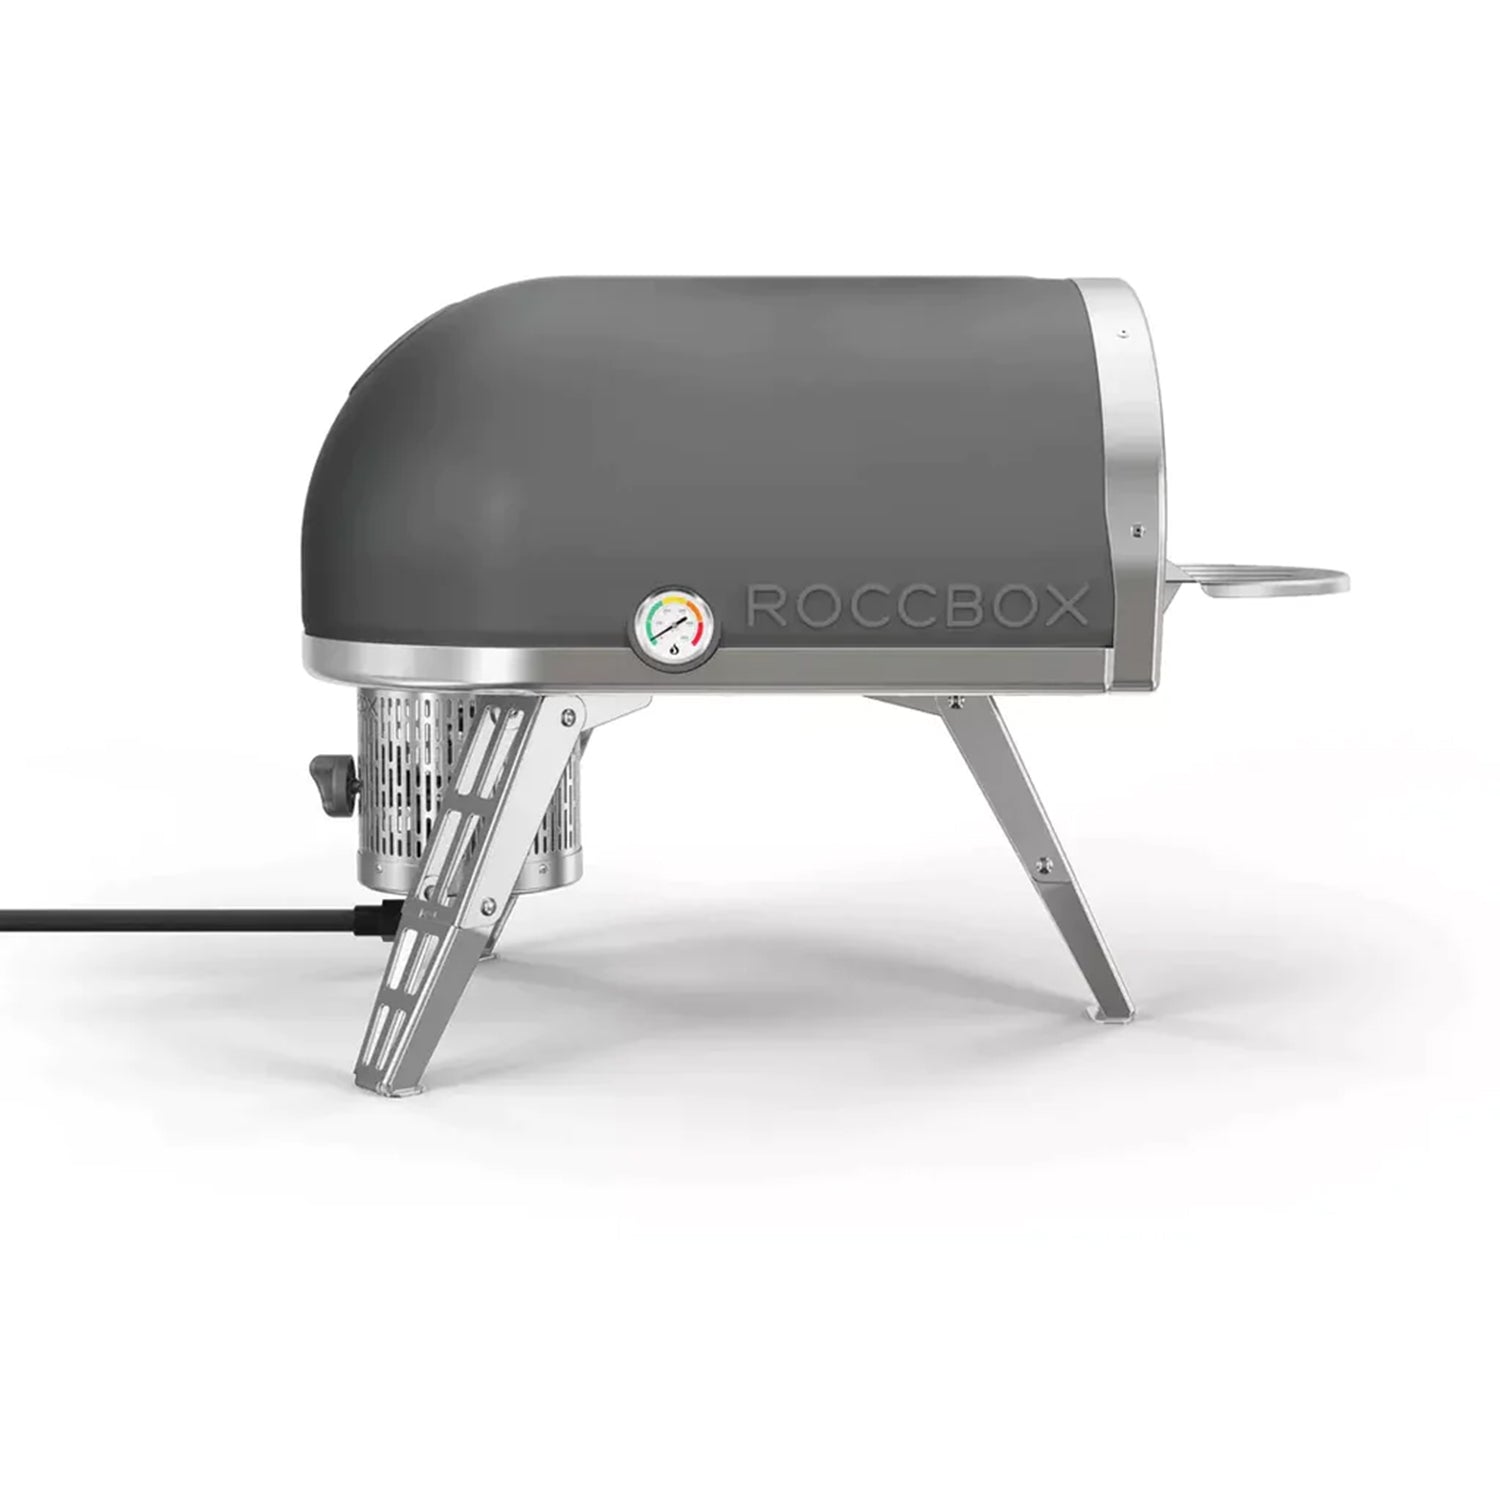 Gozney Roccbox Portable Pizza Oven Vented Mantel Attachment Stainless Steel